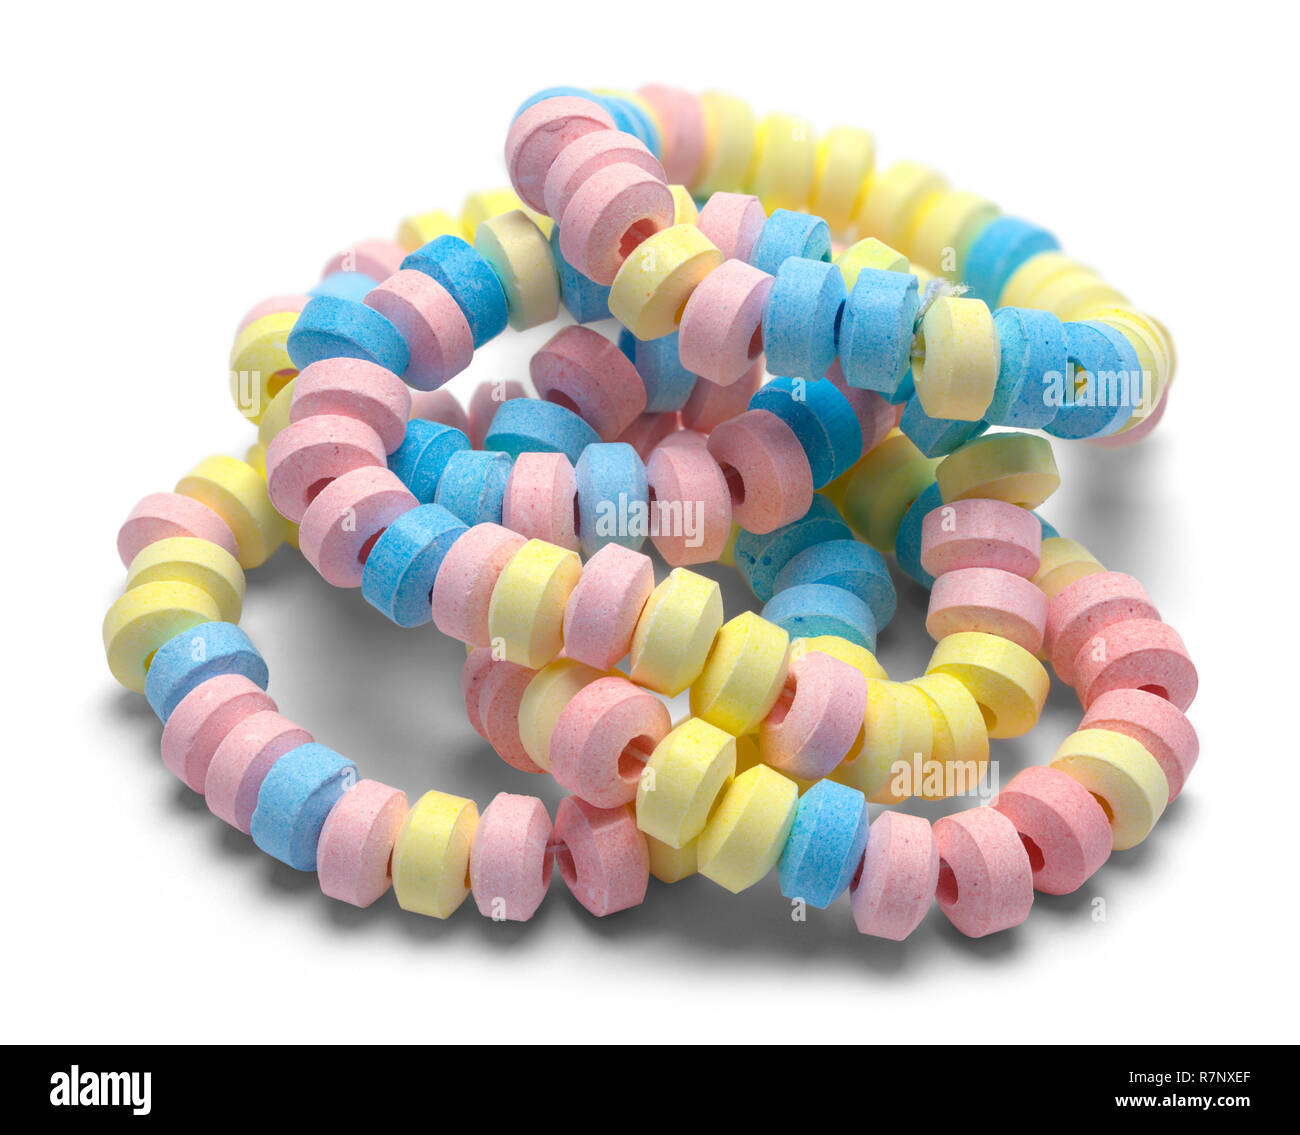 Pile of Candy Bracelets Isolated on a White Background. Stock Photo